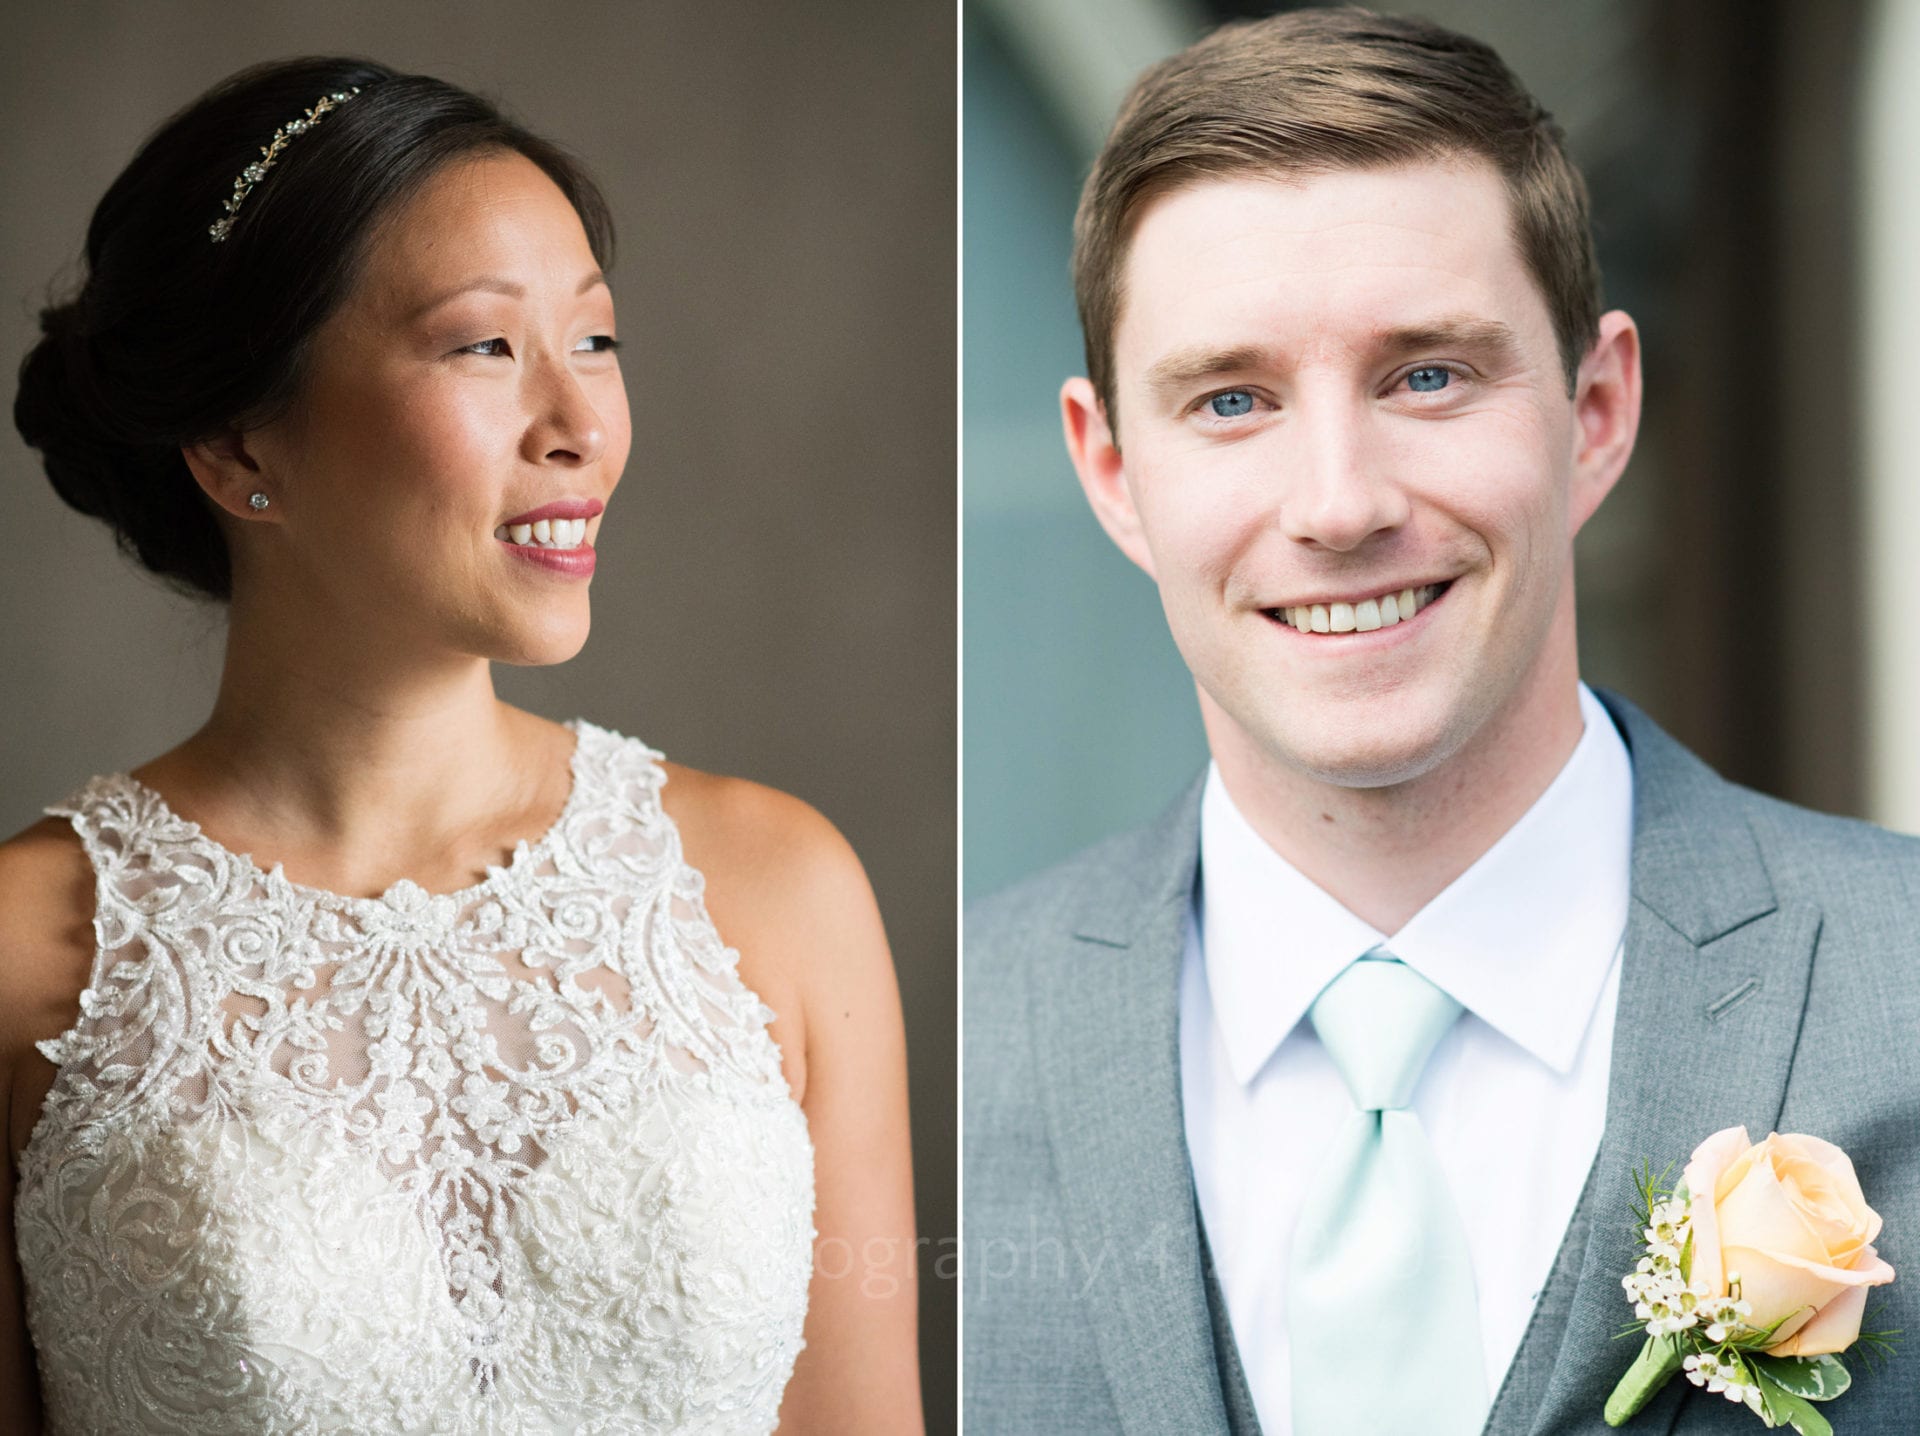 portraits of the smiling bride and groom in their wedding day attire